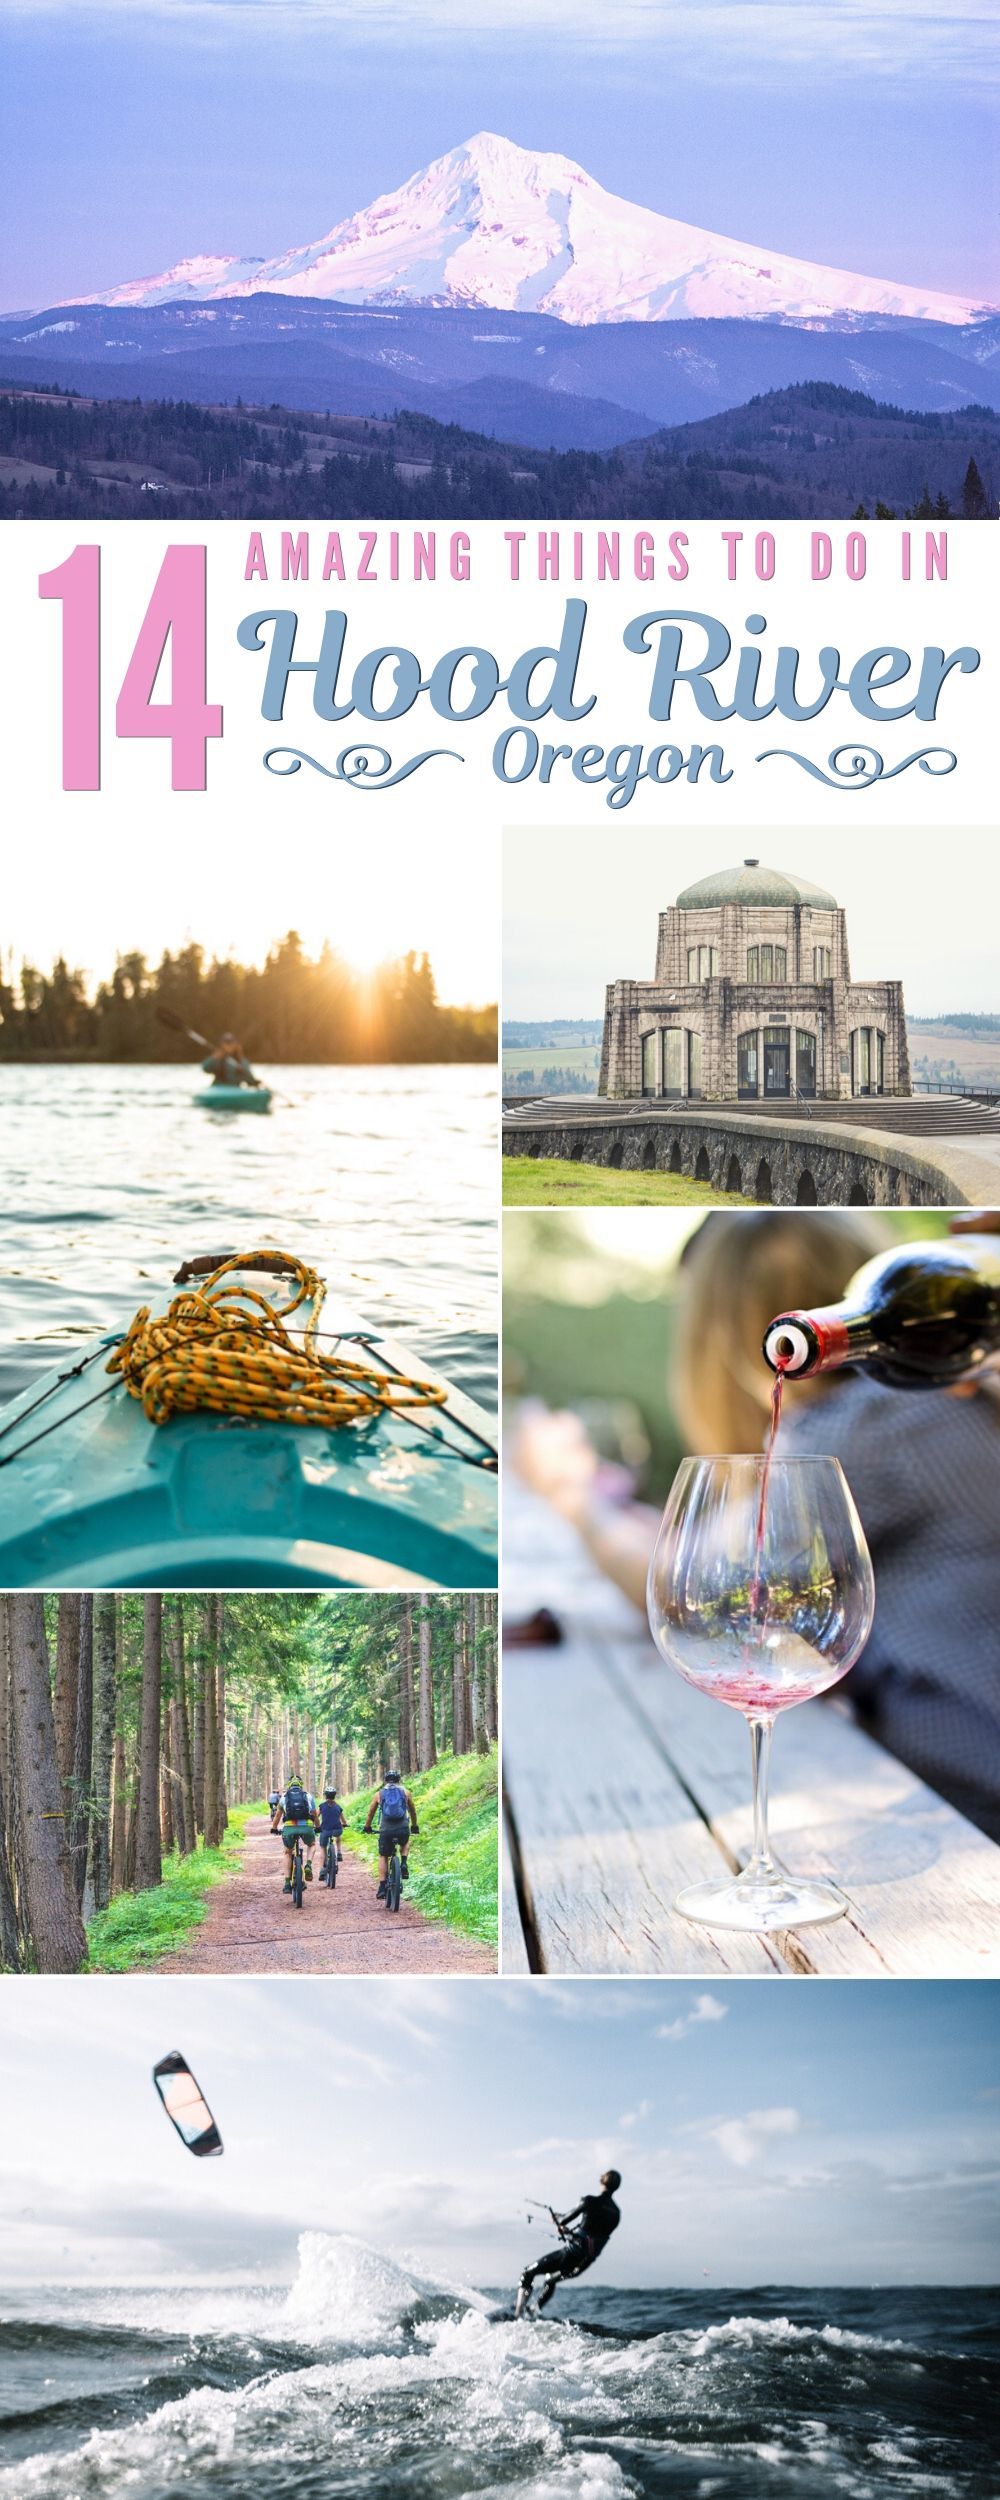 Best Things to do in Hood River, Oregon, USA